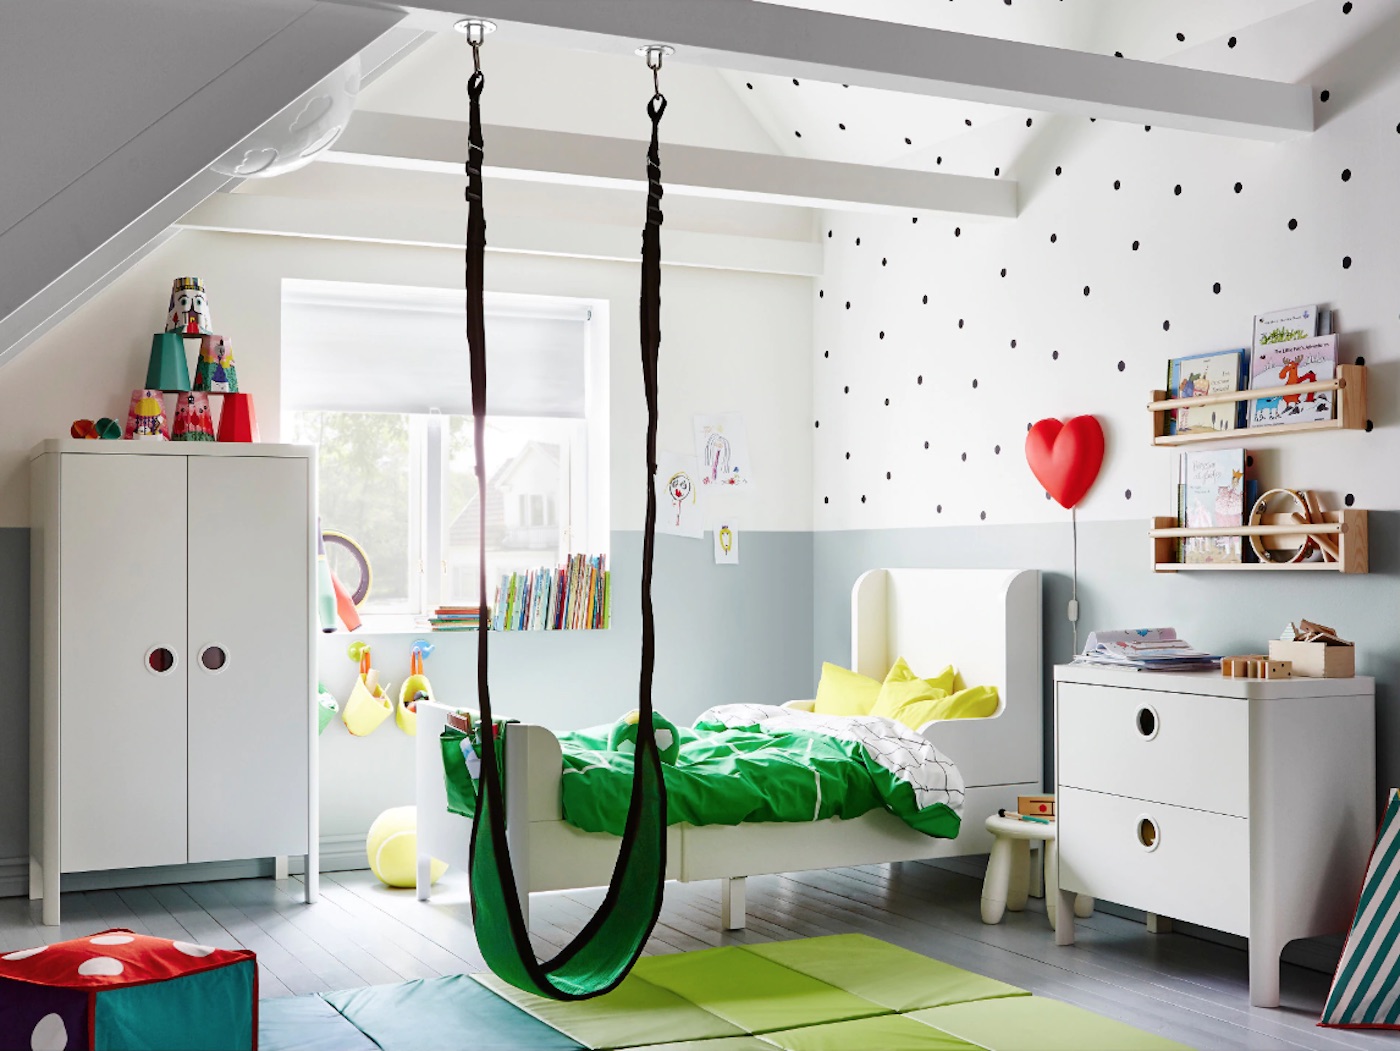 18 Fun Kids Room Ideas For Inspiration Simplemost